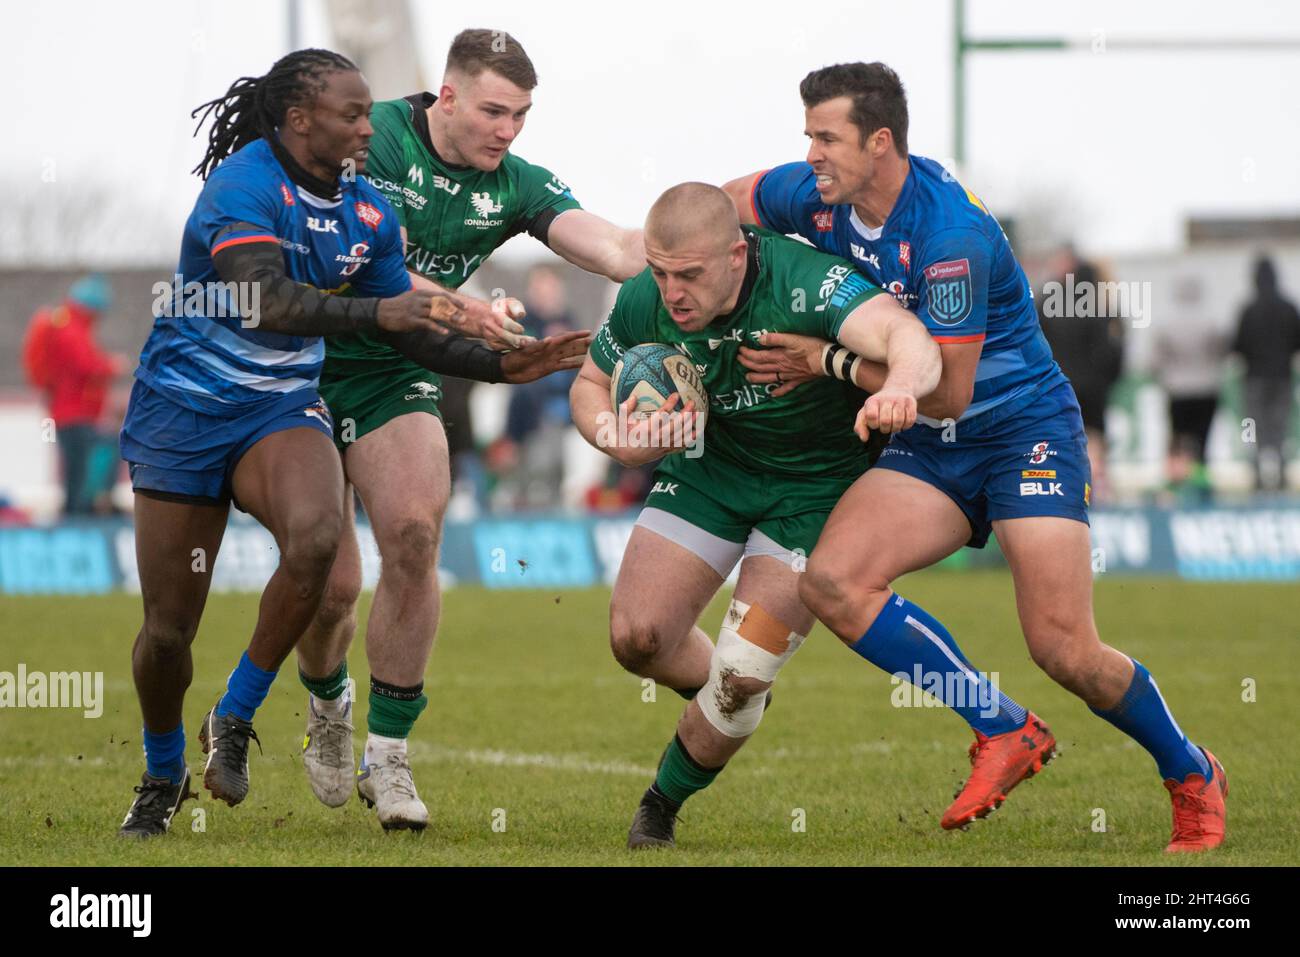 Jordan Duggan of Connacht tackled by Ruhan Nel of Stormers during the  United Rugby Championship Round 10 match between Connacht Rugby and DHL  Stormers at the Sportsground in Galway, Ireland on February